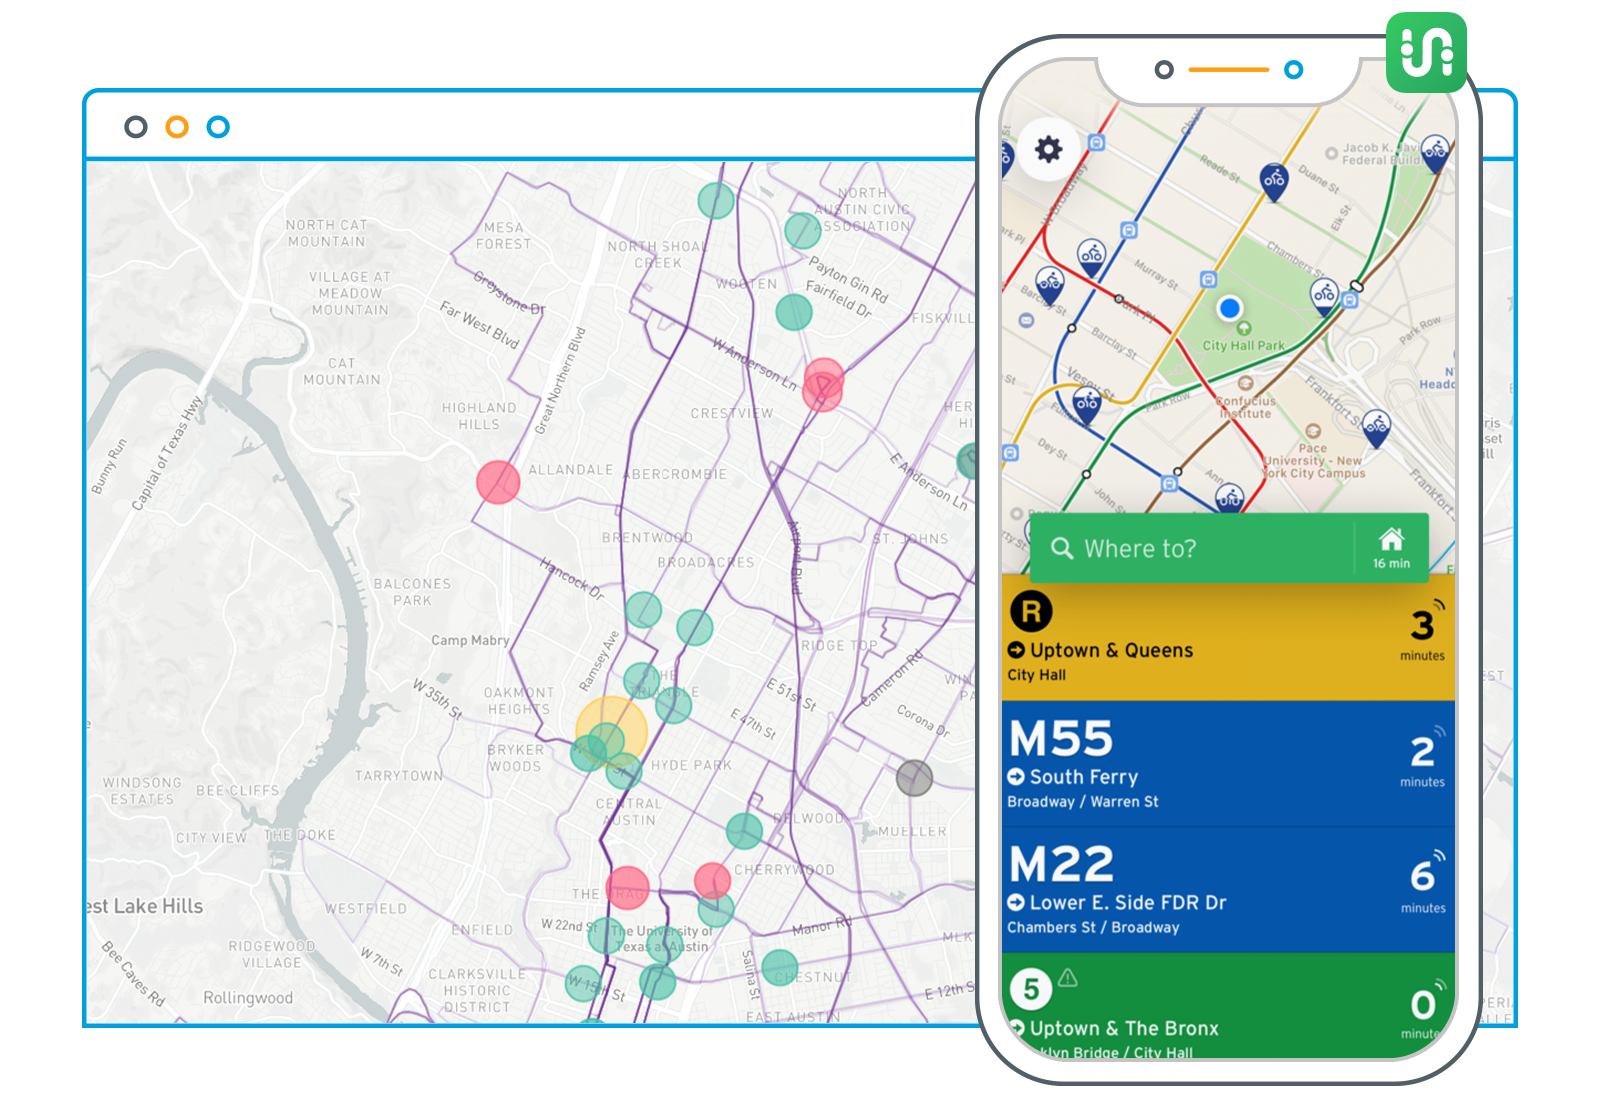 Real Time Passenger Predictions: Give passengers the very best in vehicle arrival predictions. Make your feed publicly available and give riders up-to-the-second updates in whatever app they use including Transit App, websites, signgage, or ADA-supportive media your passengers use. 